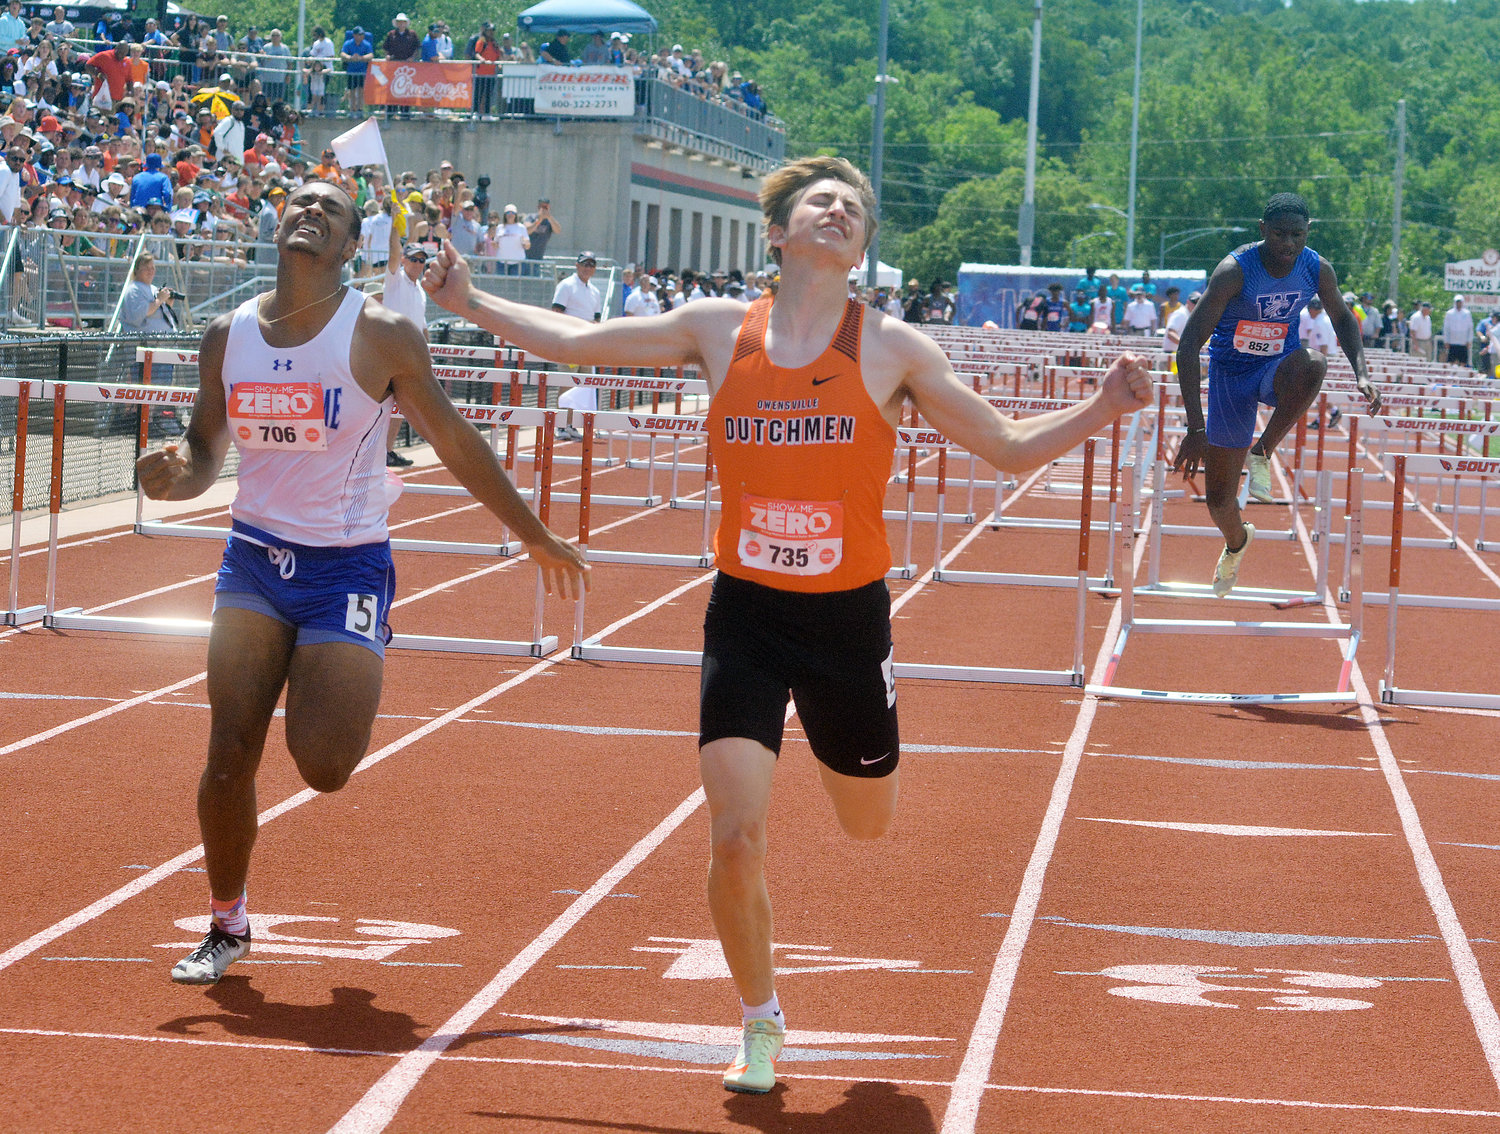 Bryce Payne (center) celebrates his state championship in the Class 3 Boys 110-meter hurdles during the Missouri State High School Activities Association (MSHSAA) State Track and Field Championships held over the weekend at Jefferson City High School’s Dennis and Roberta Licklider Track Complex inside of Adkins Stadium. Payne’s state title is the first individual one for Owensville High School since Bryan Candrl won the pole vault back in 2018.